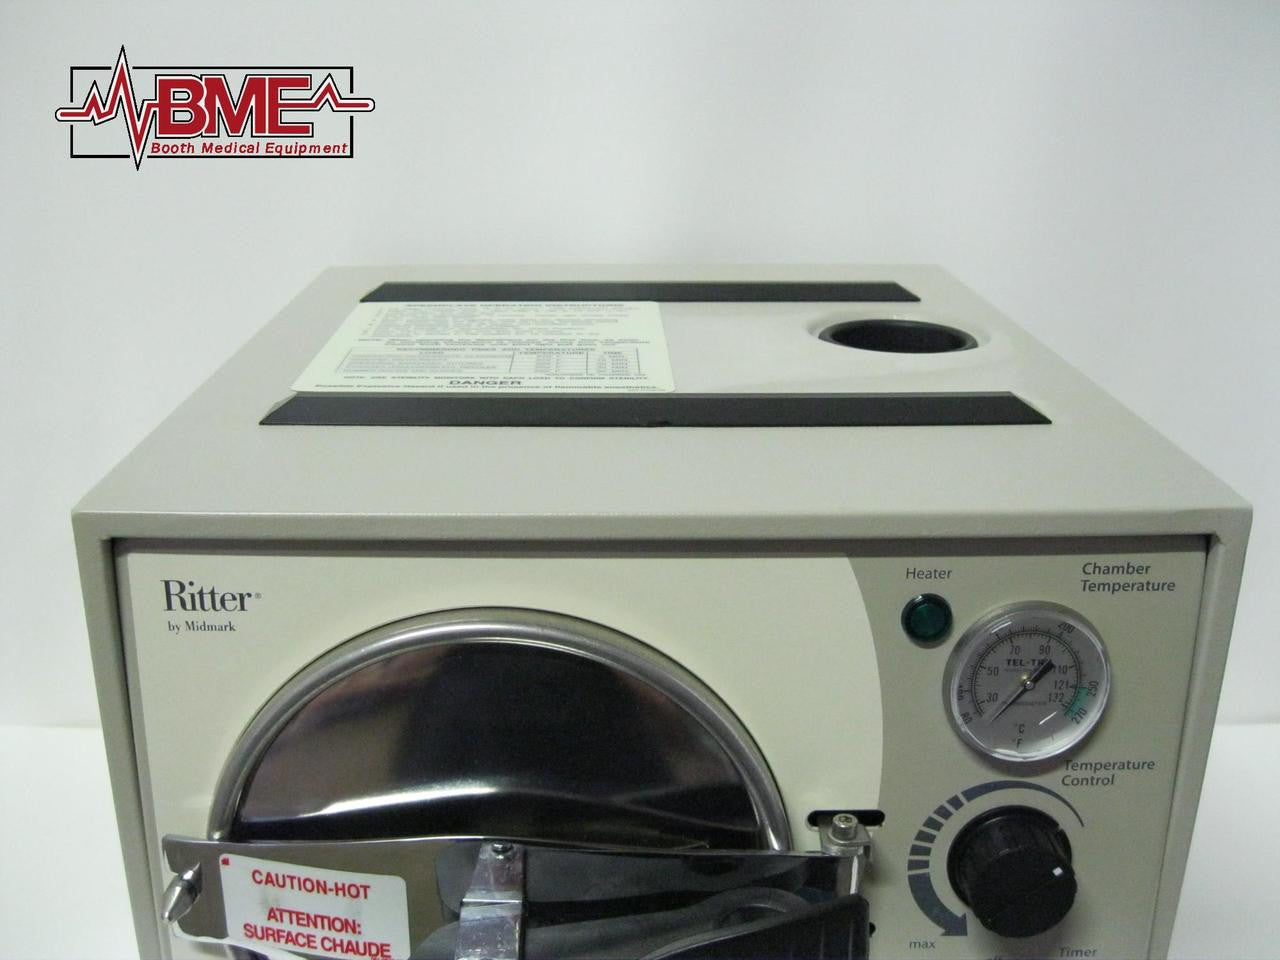    Midmark Ritter M7 Refurbished Autoclave - Top